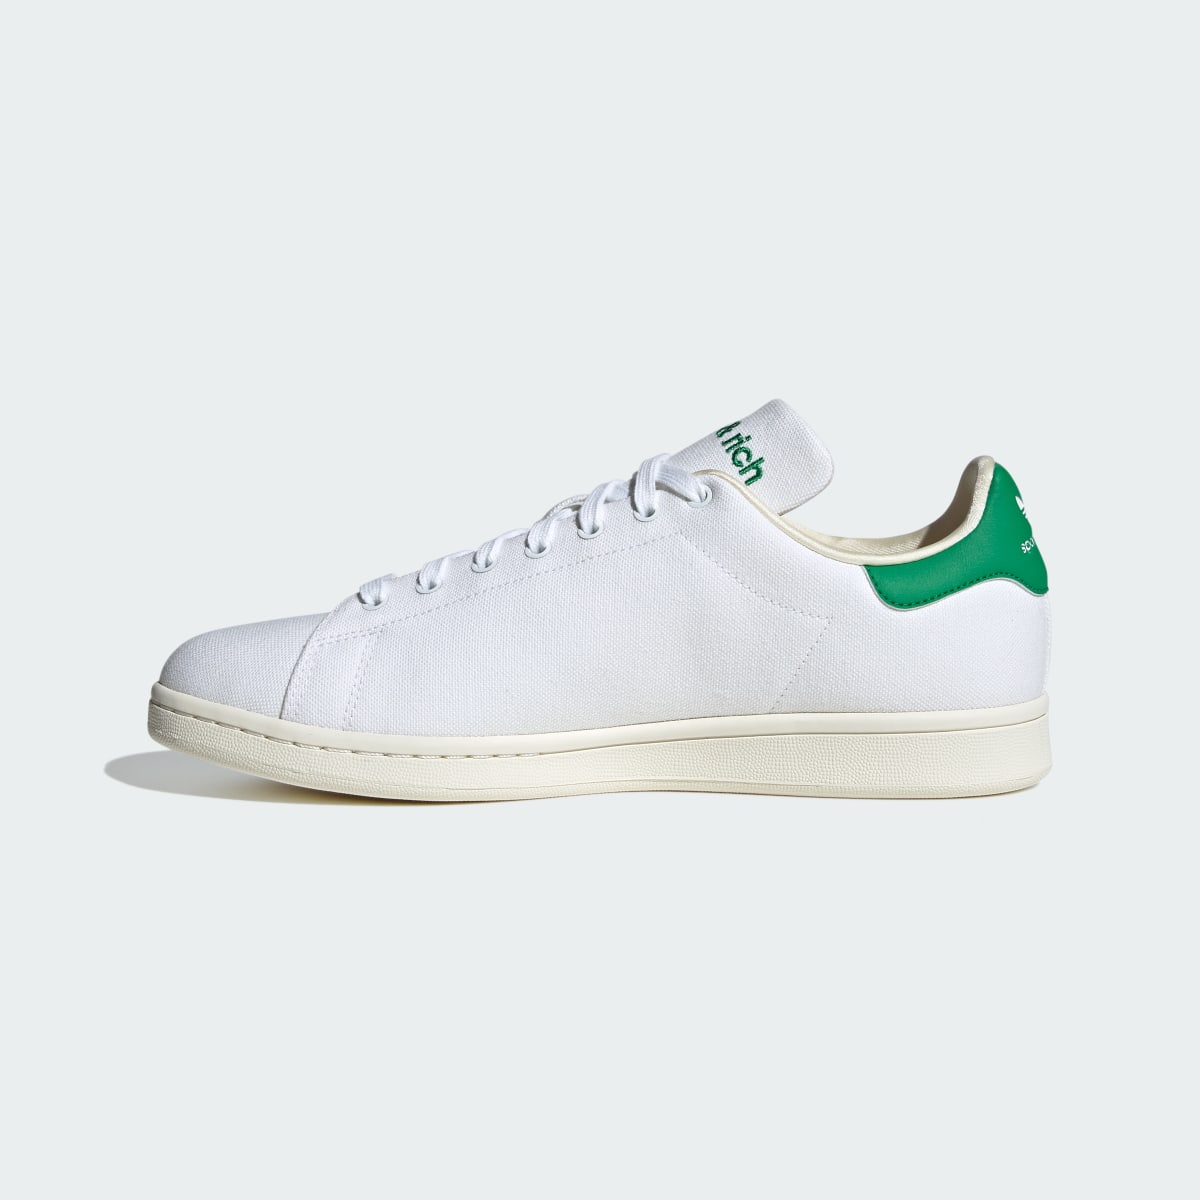 Adidas Stan Smith Sporty & Rich Shoes. 8